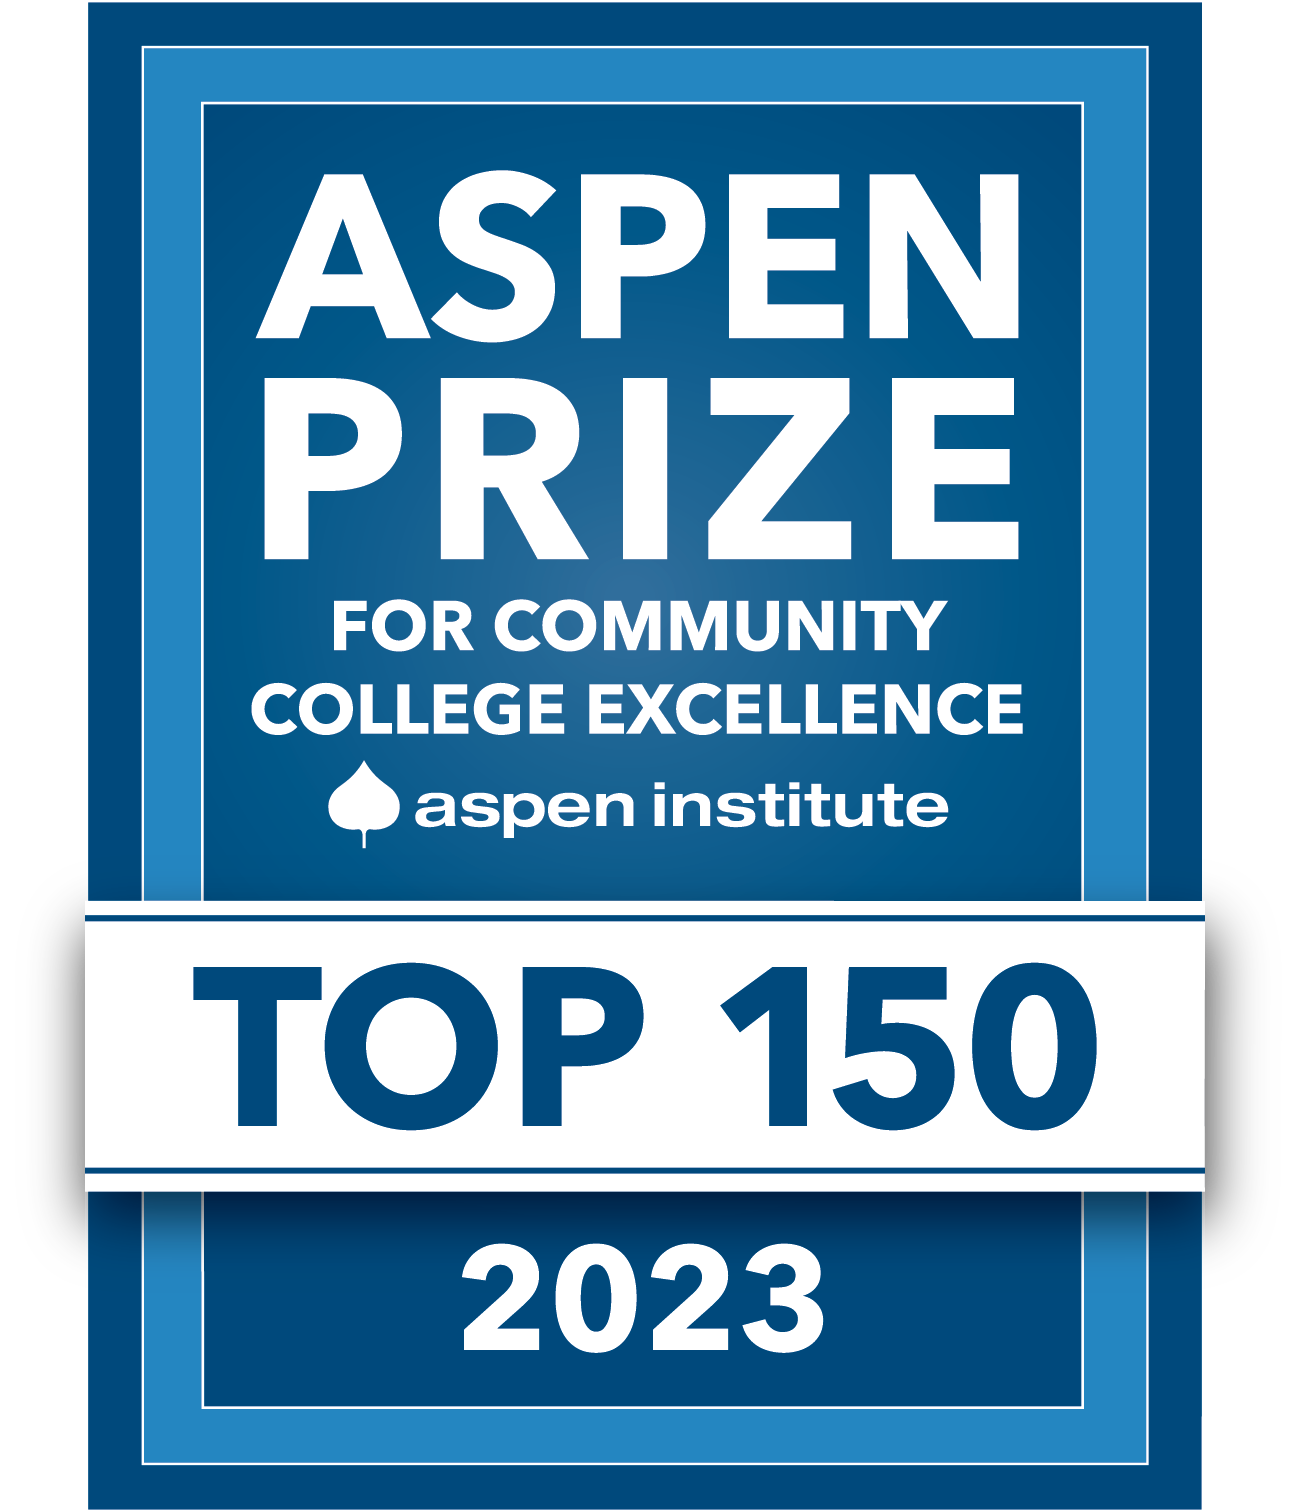 2023 Top 150 ASPEN Prize Logo for community College Excellence